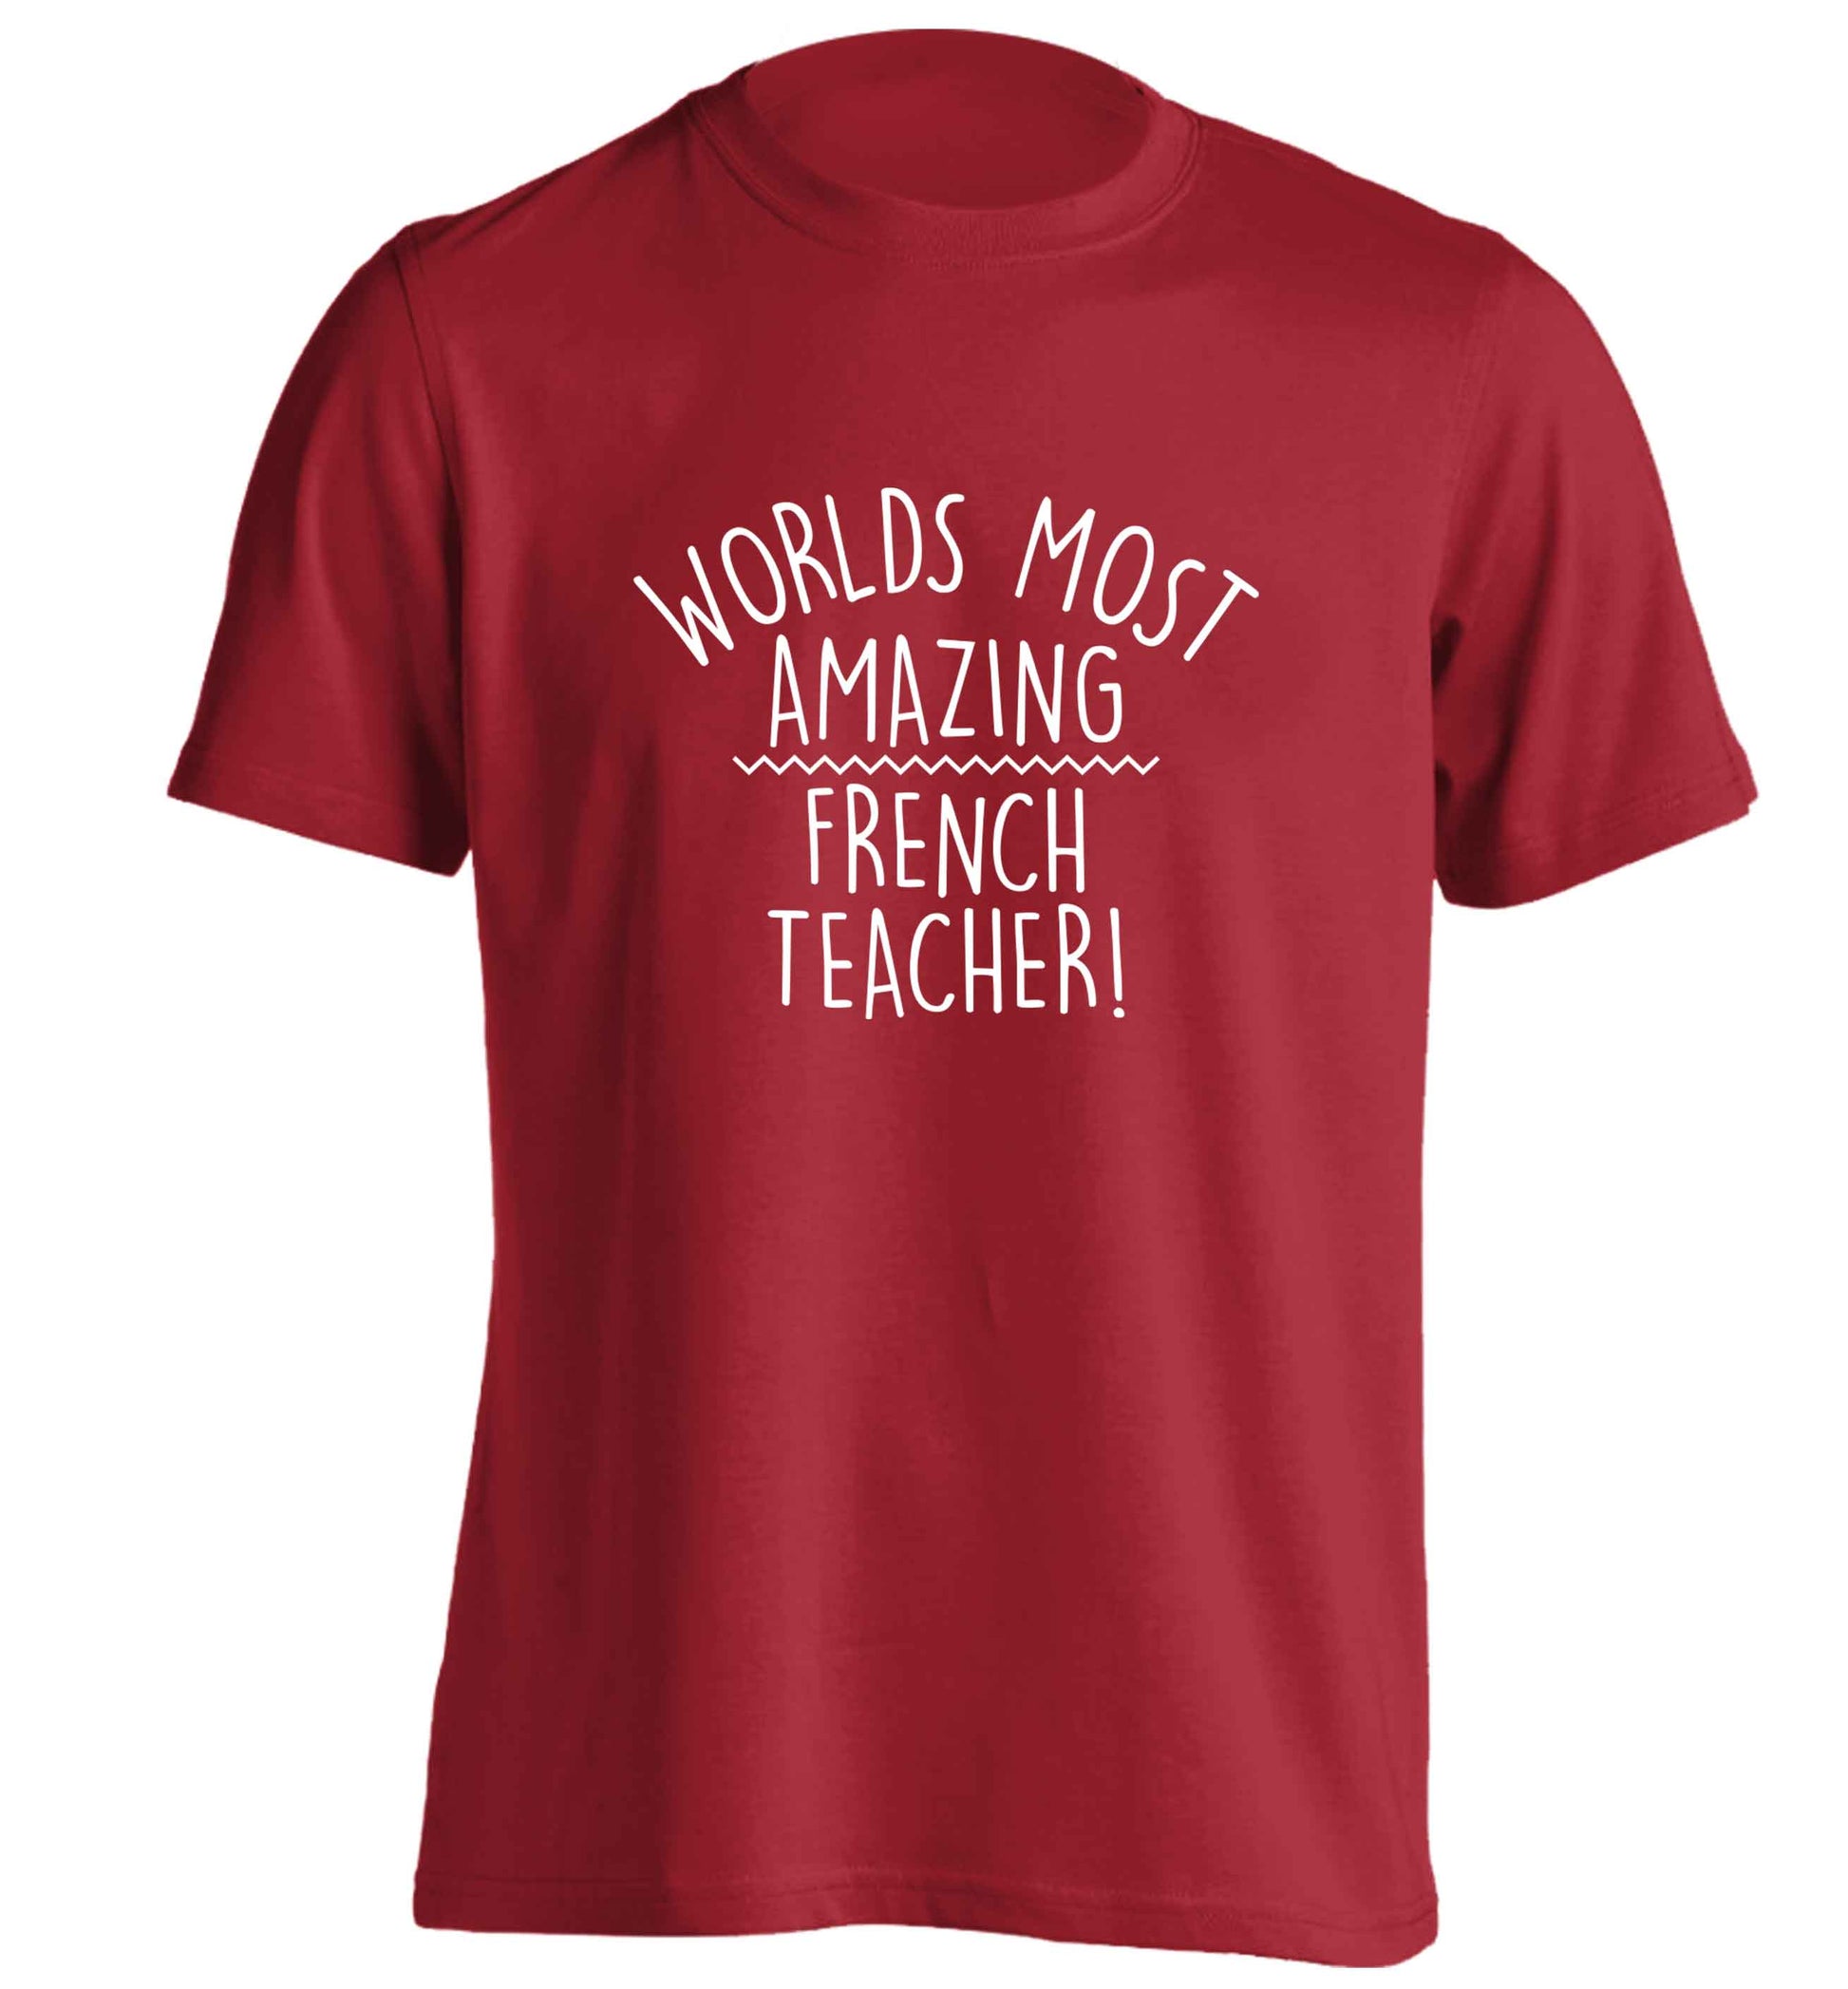 Worlds most amazing French teacher adults unisex red Tshirt 2XL